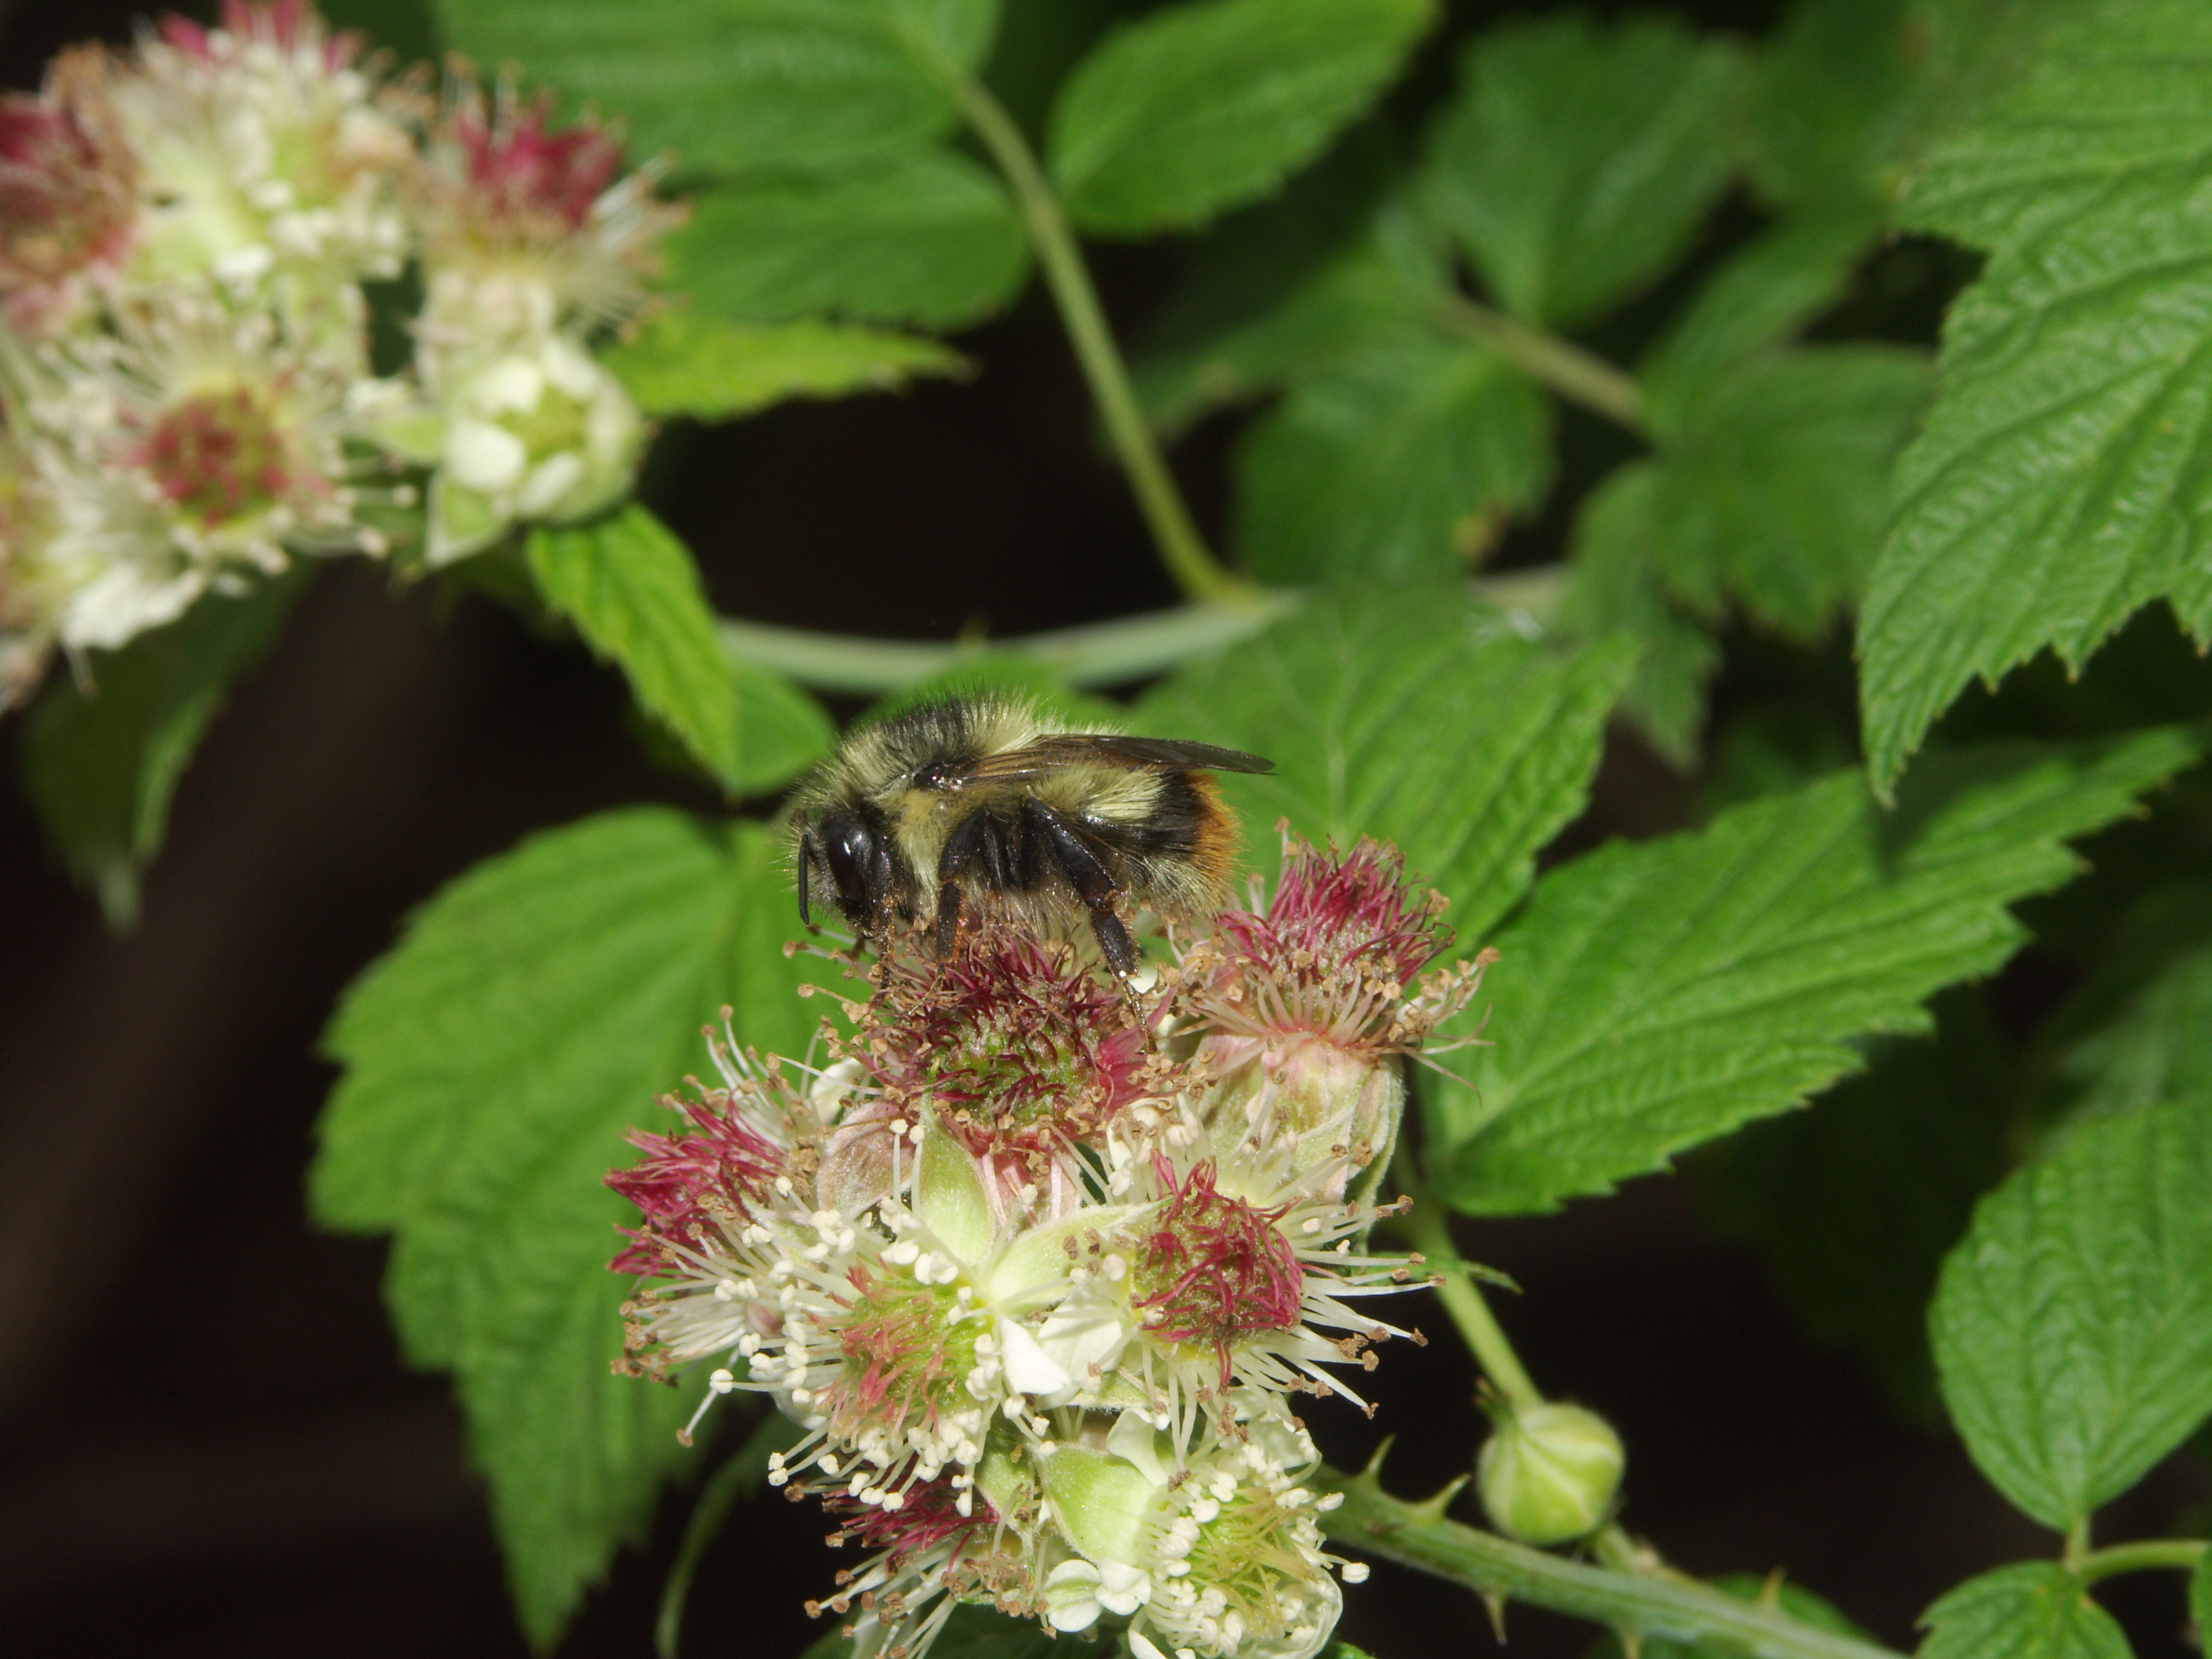 The aptly-named fuzzy horned bumble bee, with its long, fluffy hair, alights on a white raspberry flower in this close-up image.